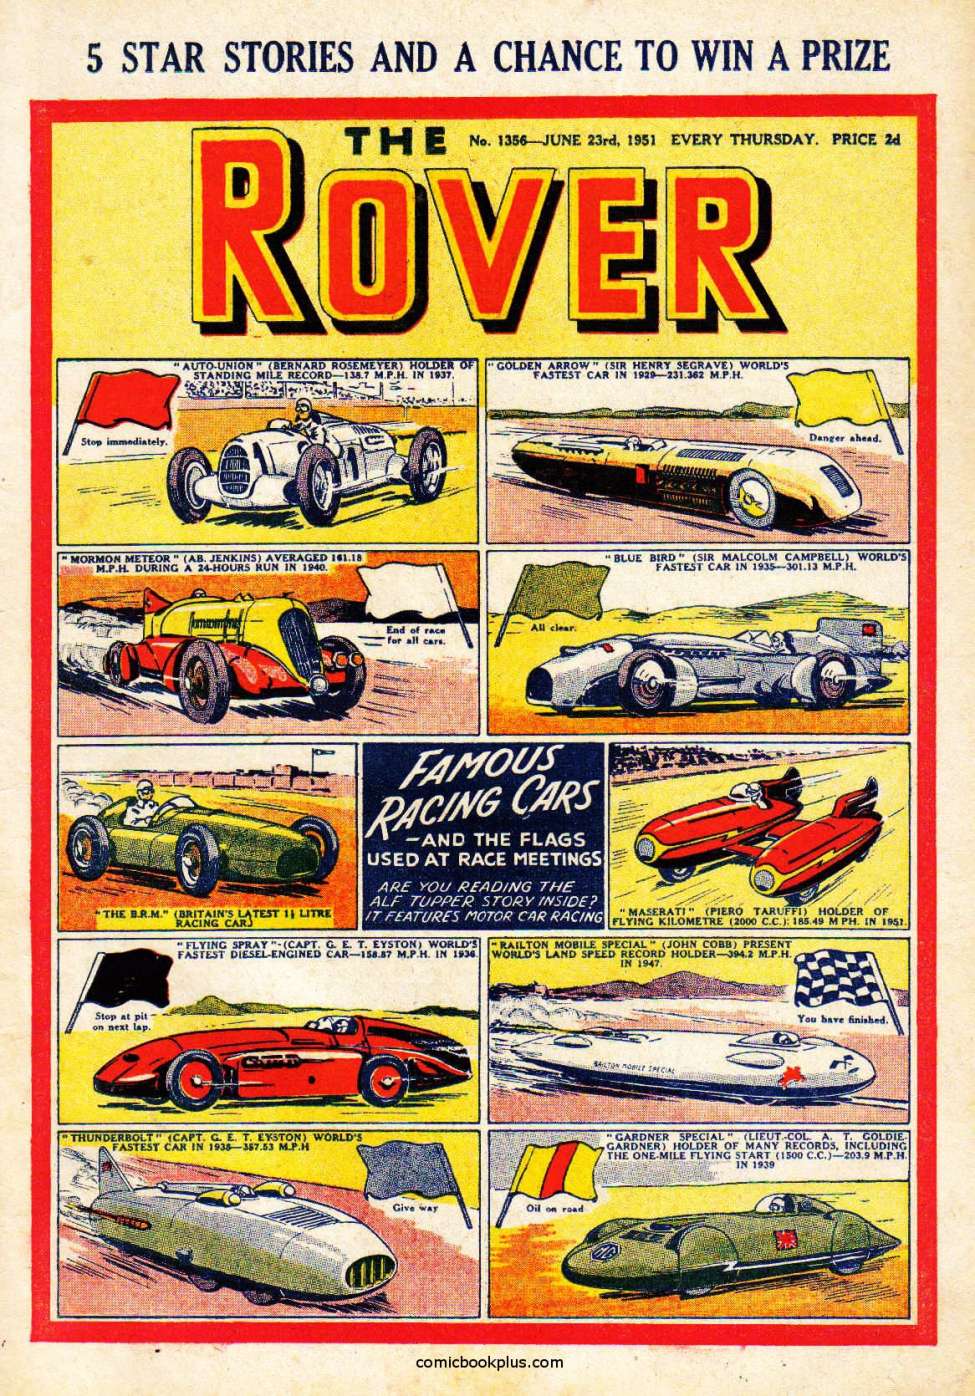 Book Cover For The Rover 1356